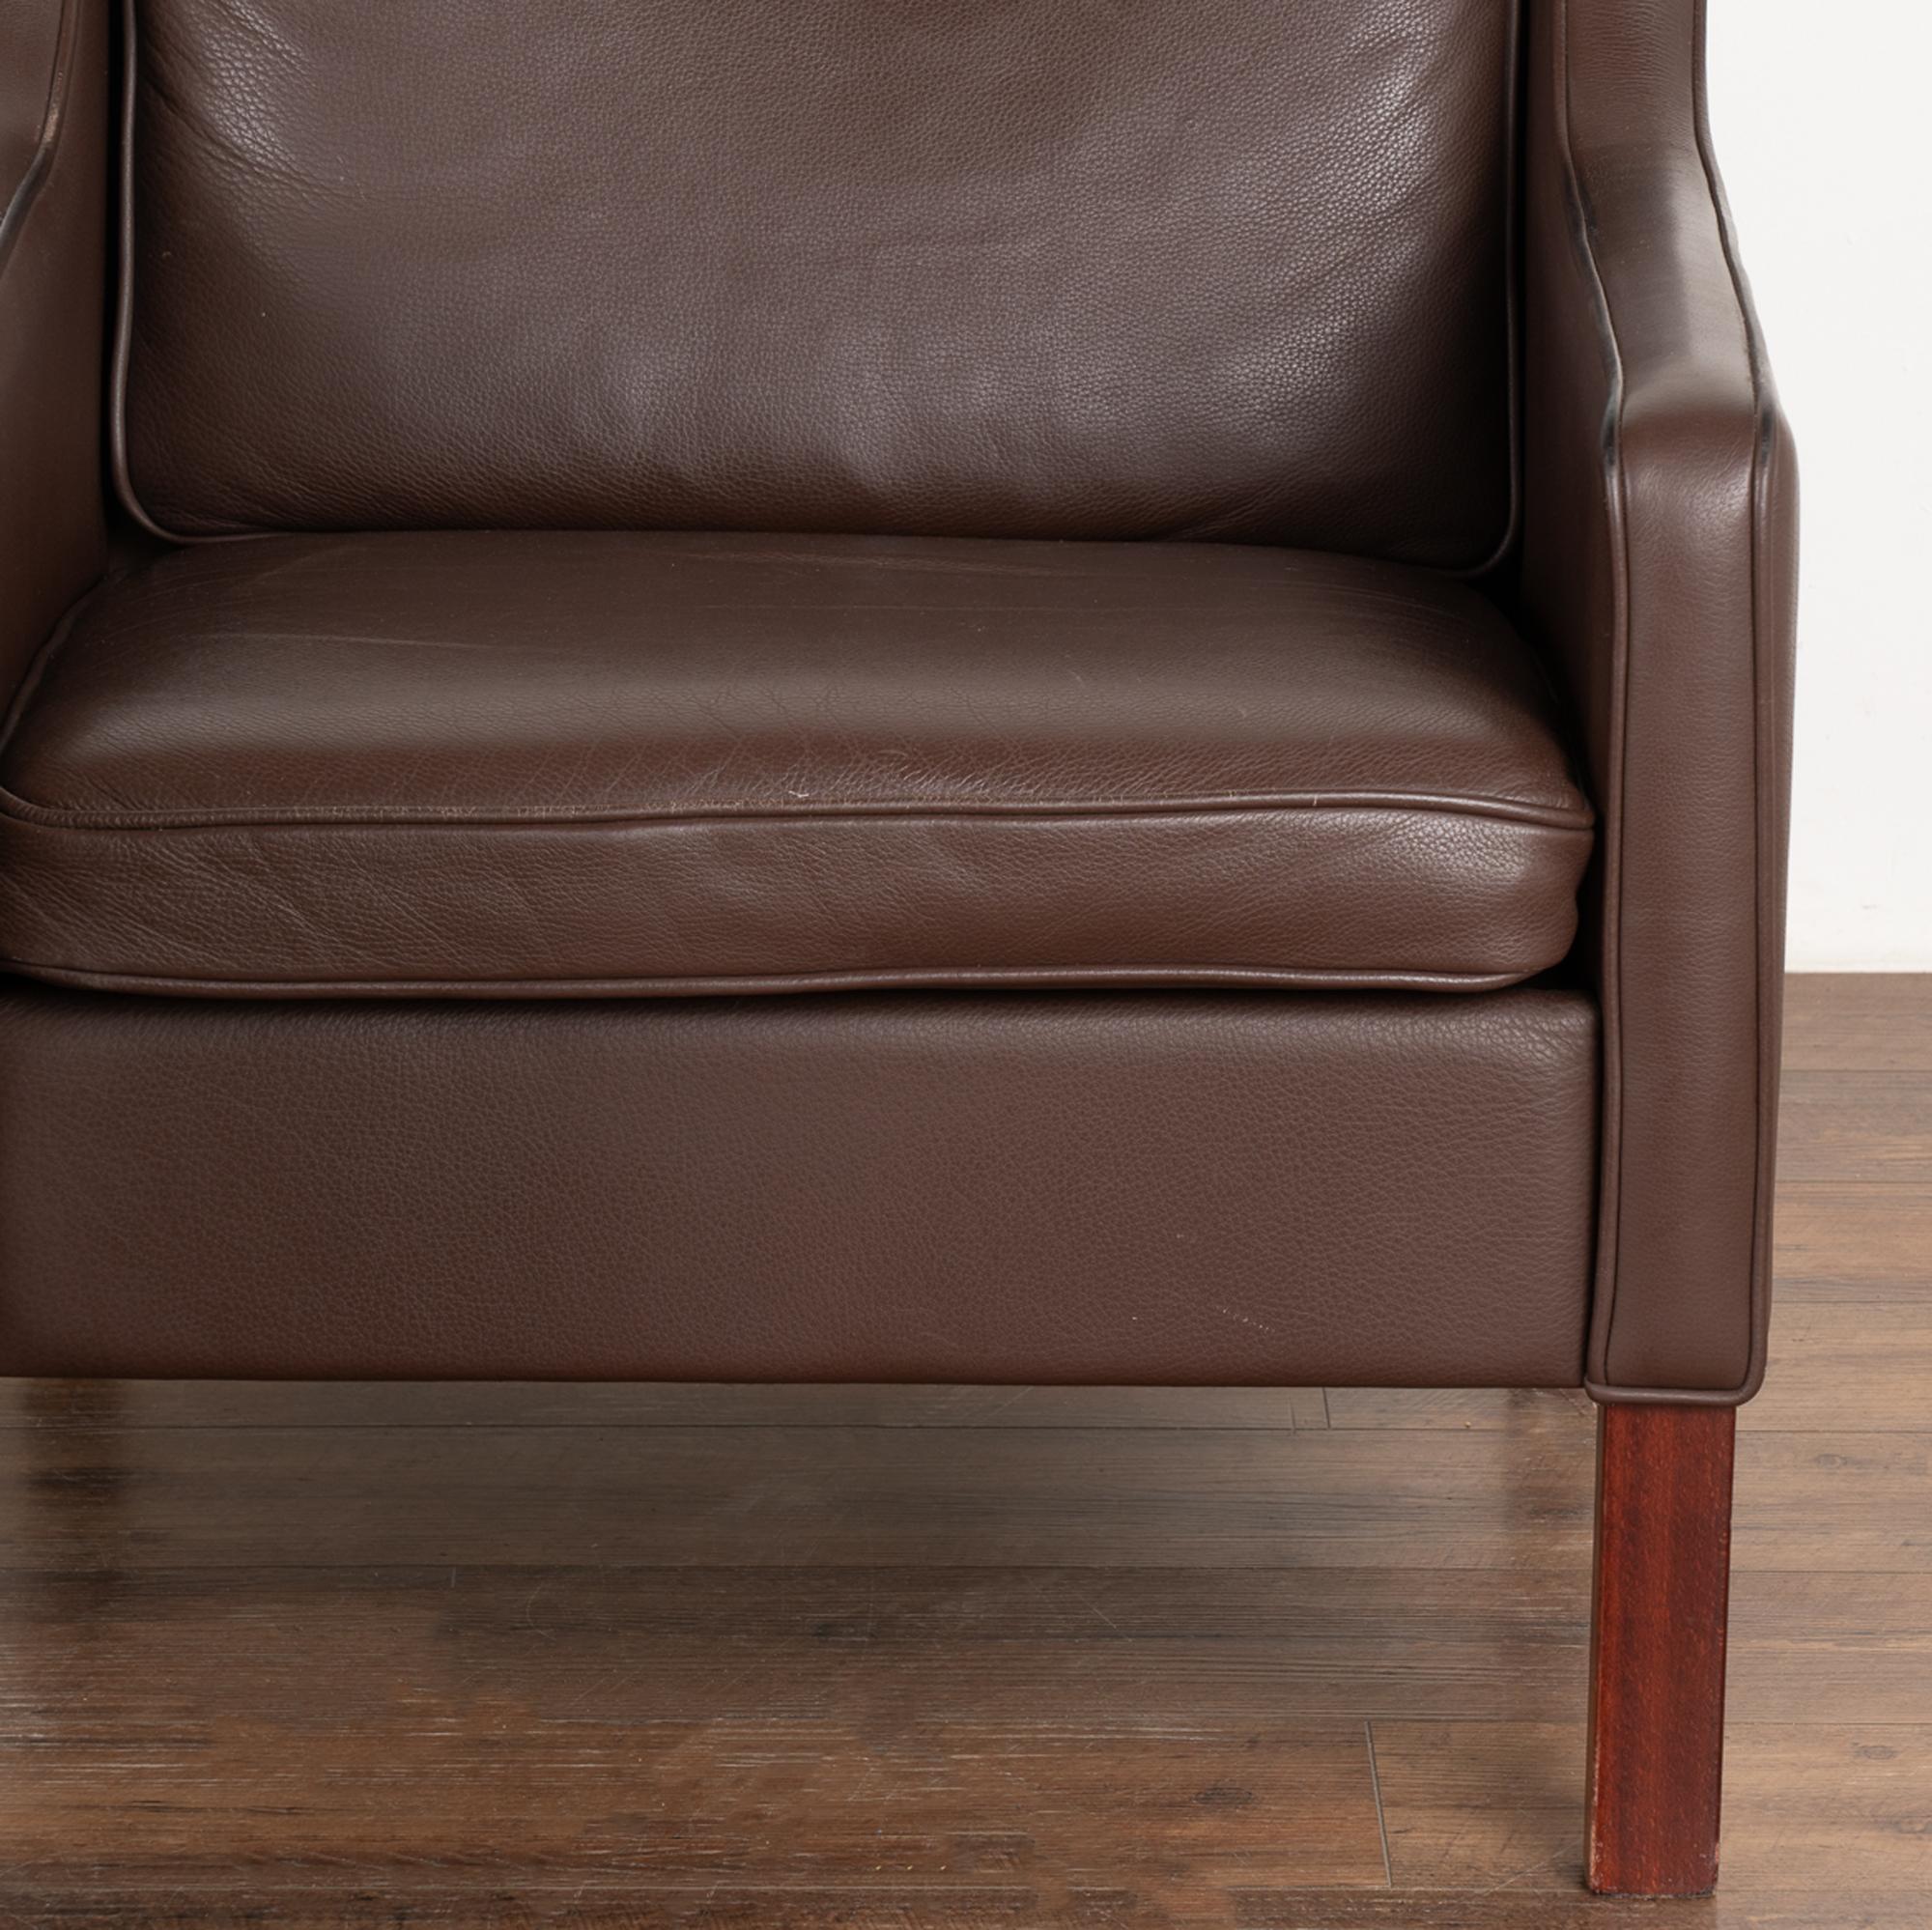 20th Century Pair, Midcentury Brown Leather Arm Chairs, Denmark, circa 1960-70 For Sale